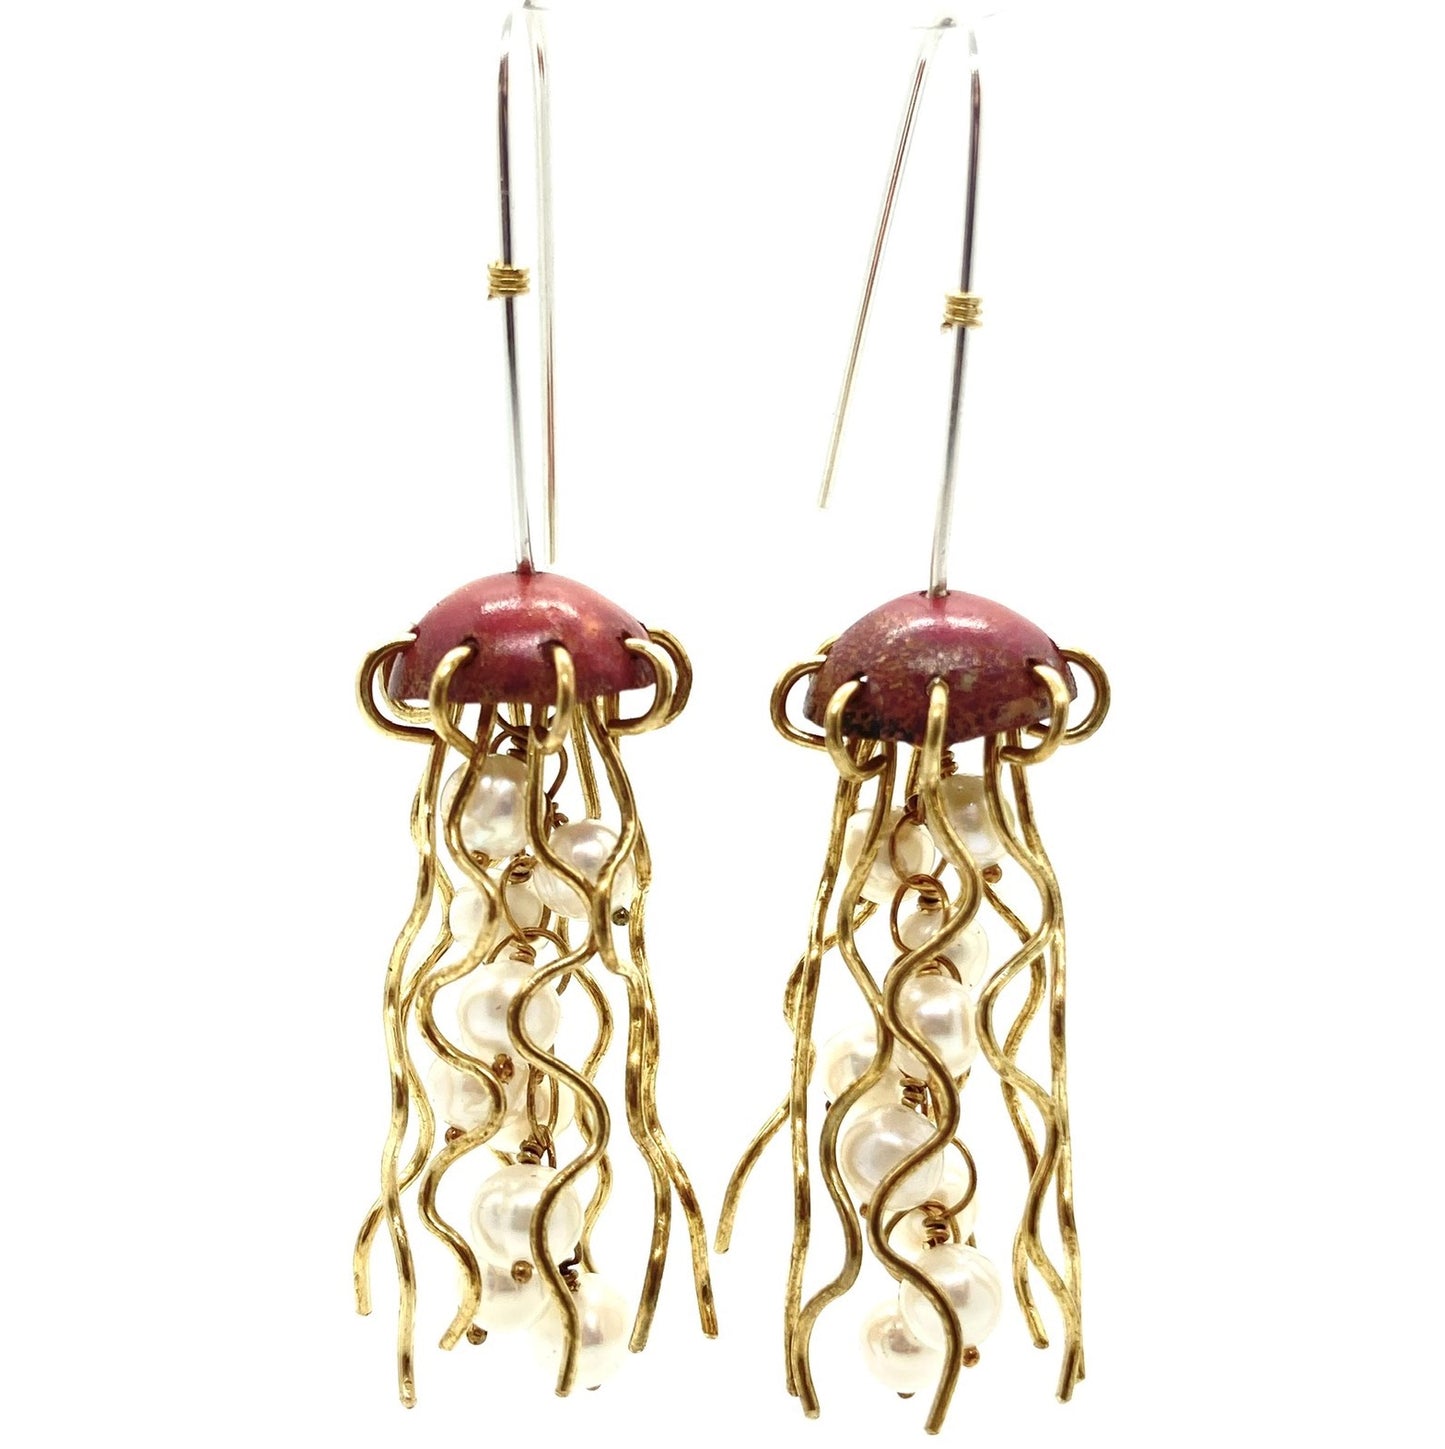 Red Copper Jellyfish Earrings with Pearls and Sterling Silver Earwires